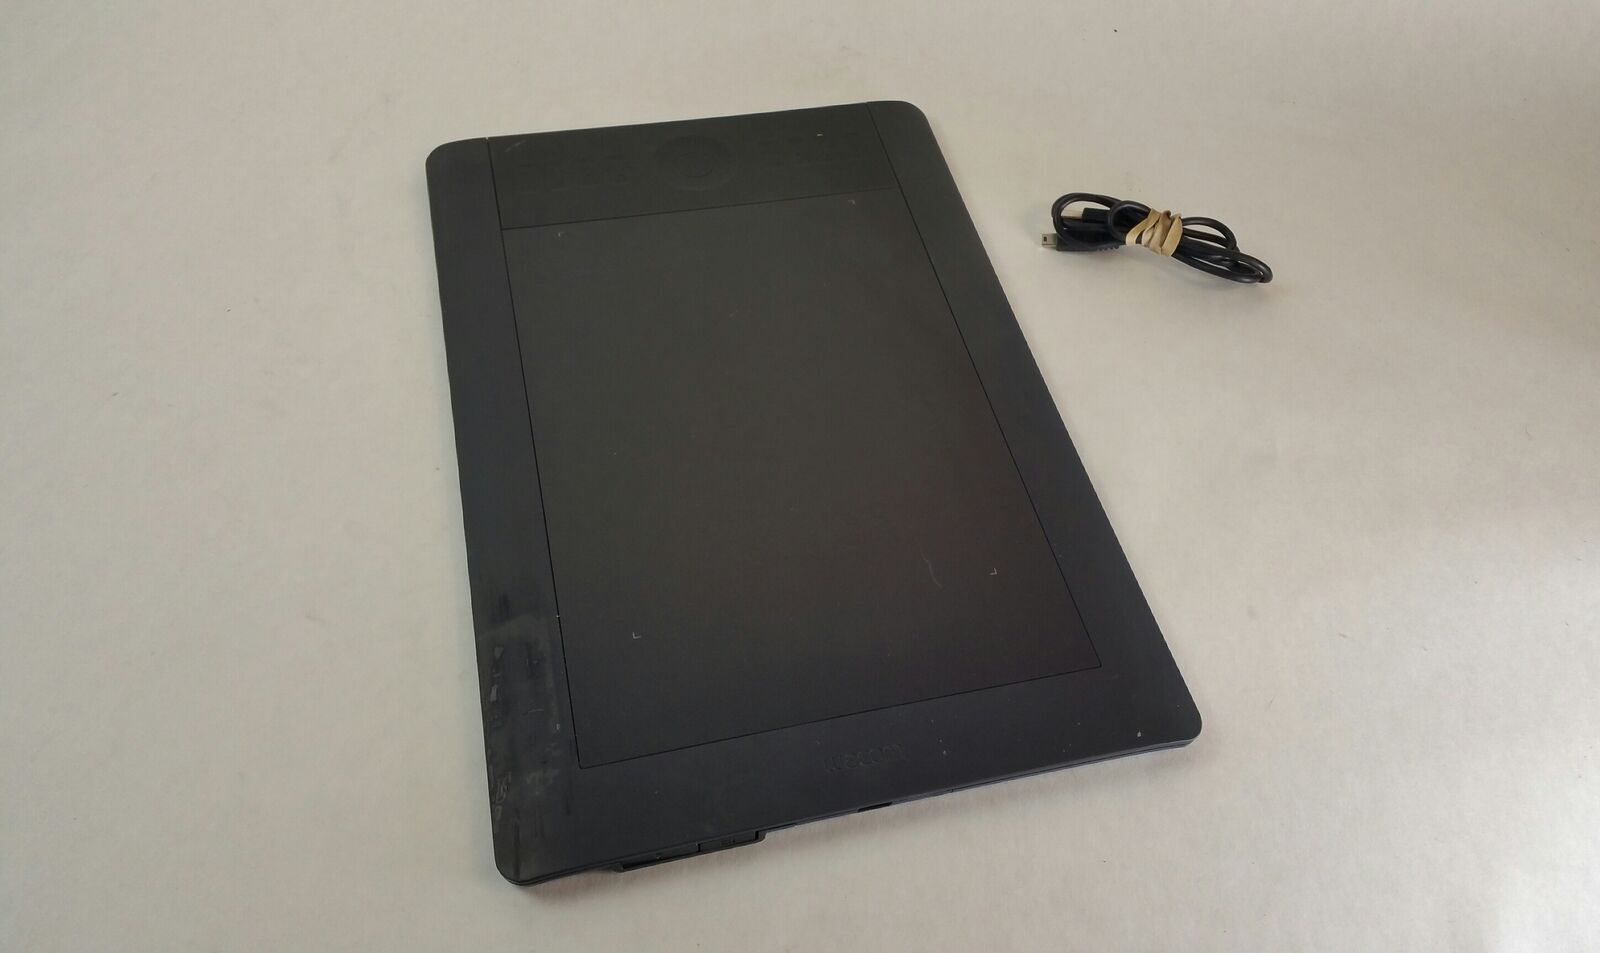 Wacom PTH-650 Intuos 5 Touch Tablet W/USB Cable A1